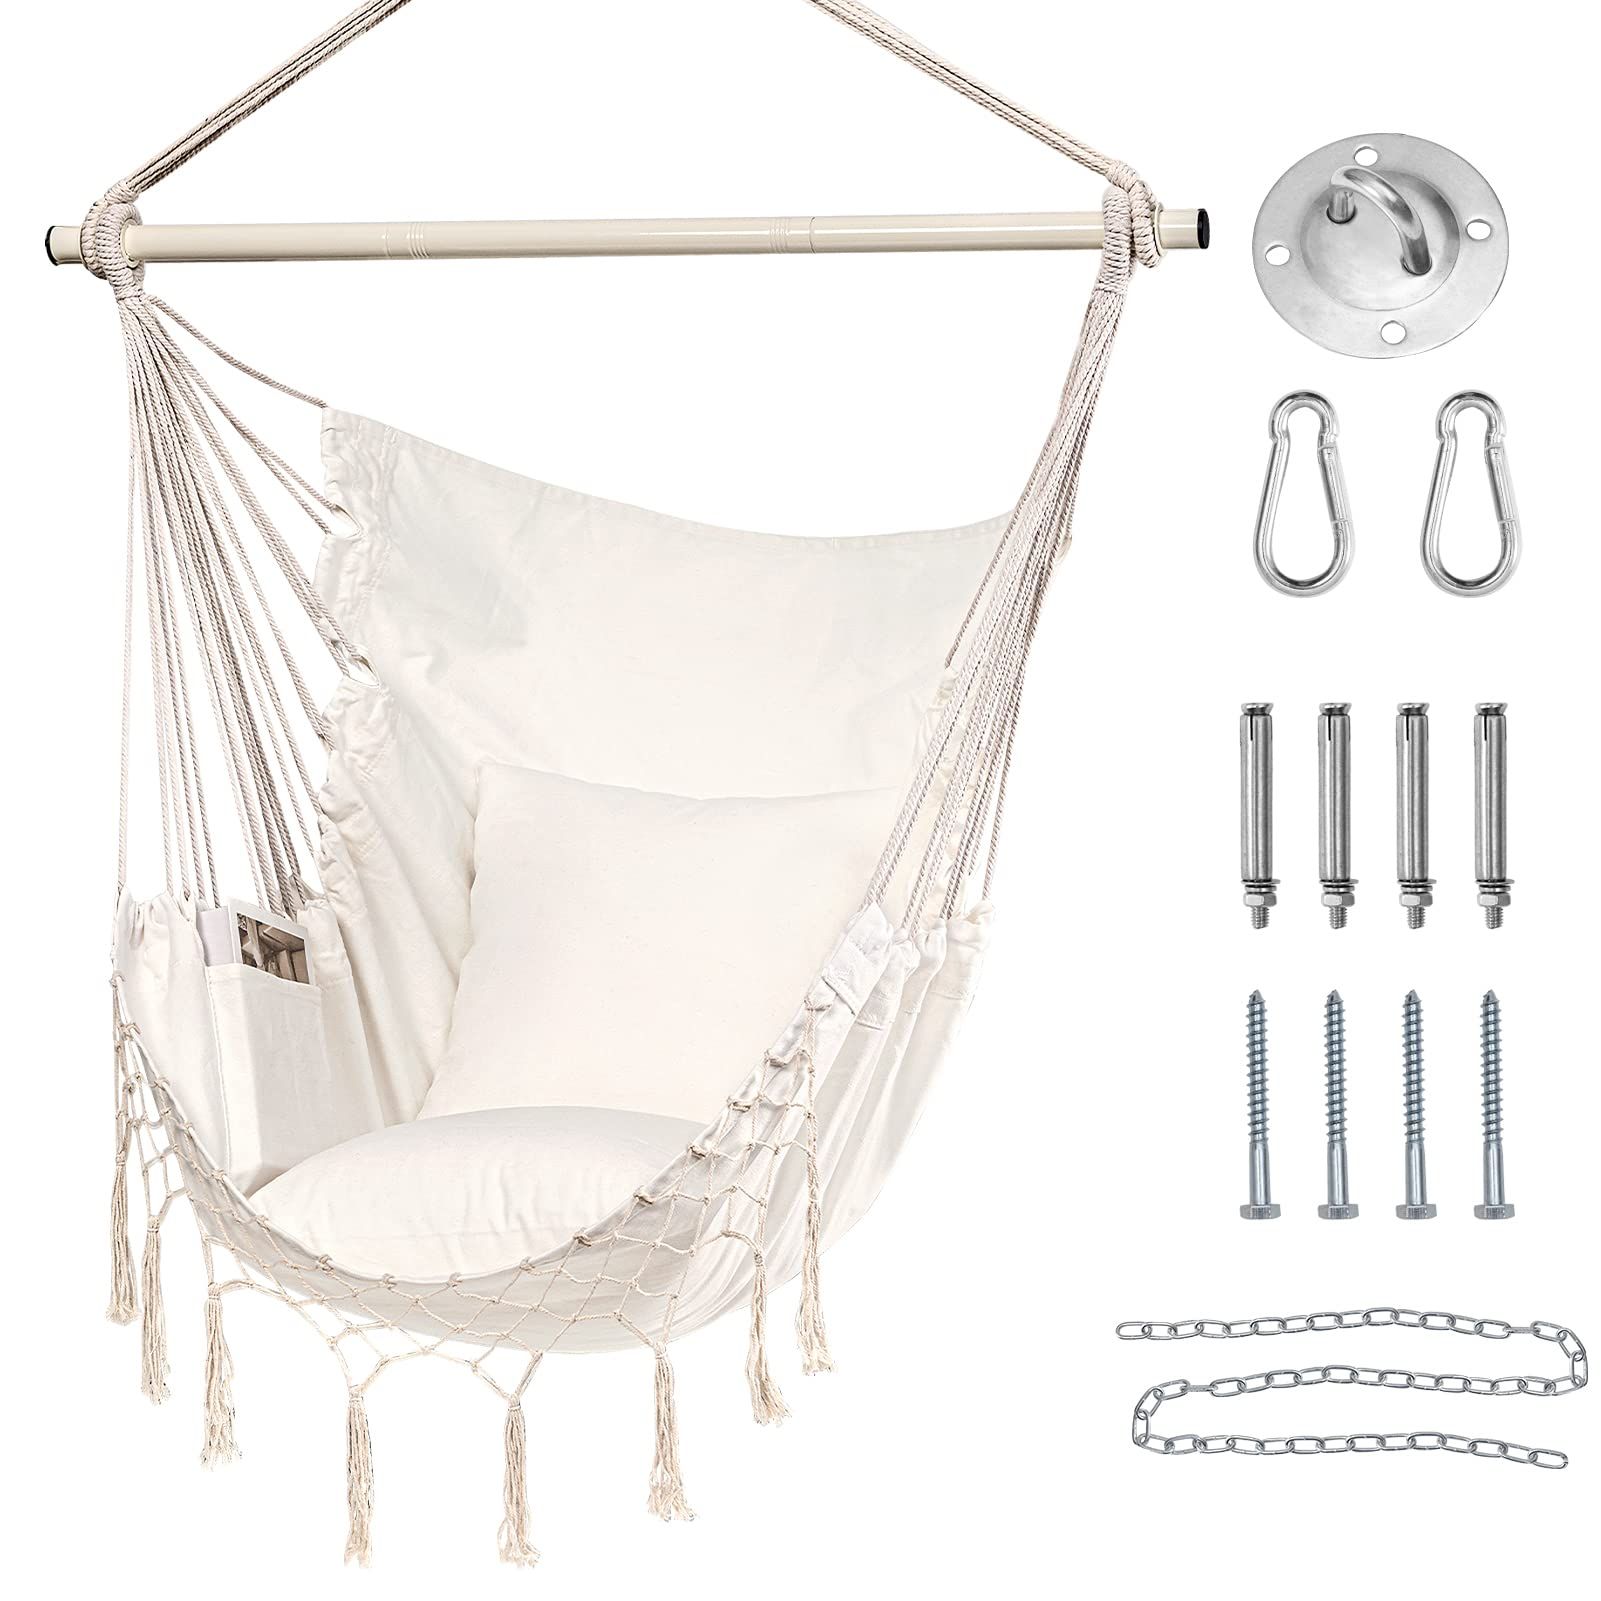 HBlife Hammock Chair, Max 330 Lbs, 2 Pillows Included, Beige Hanging Chair with Pocket and Macrame,  | Amazon (US)